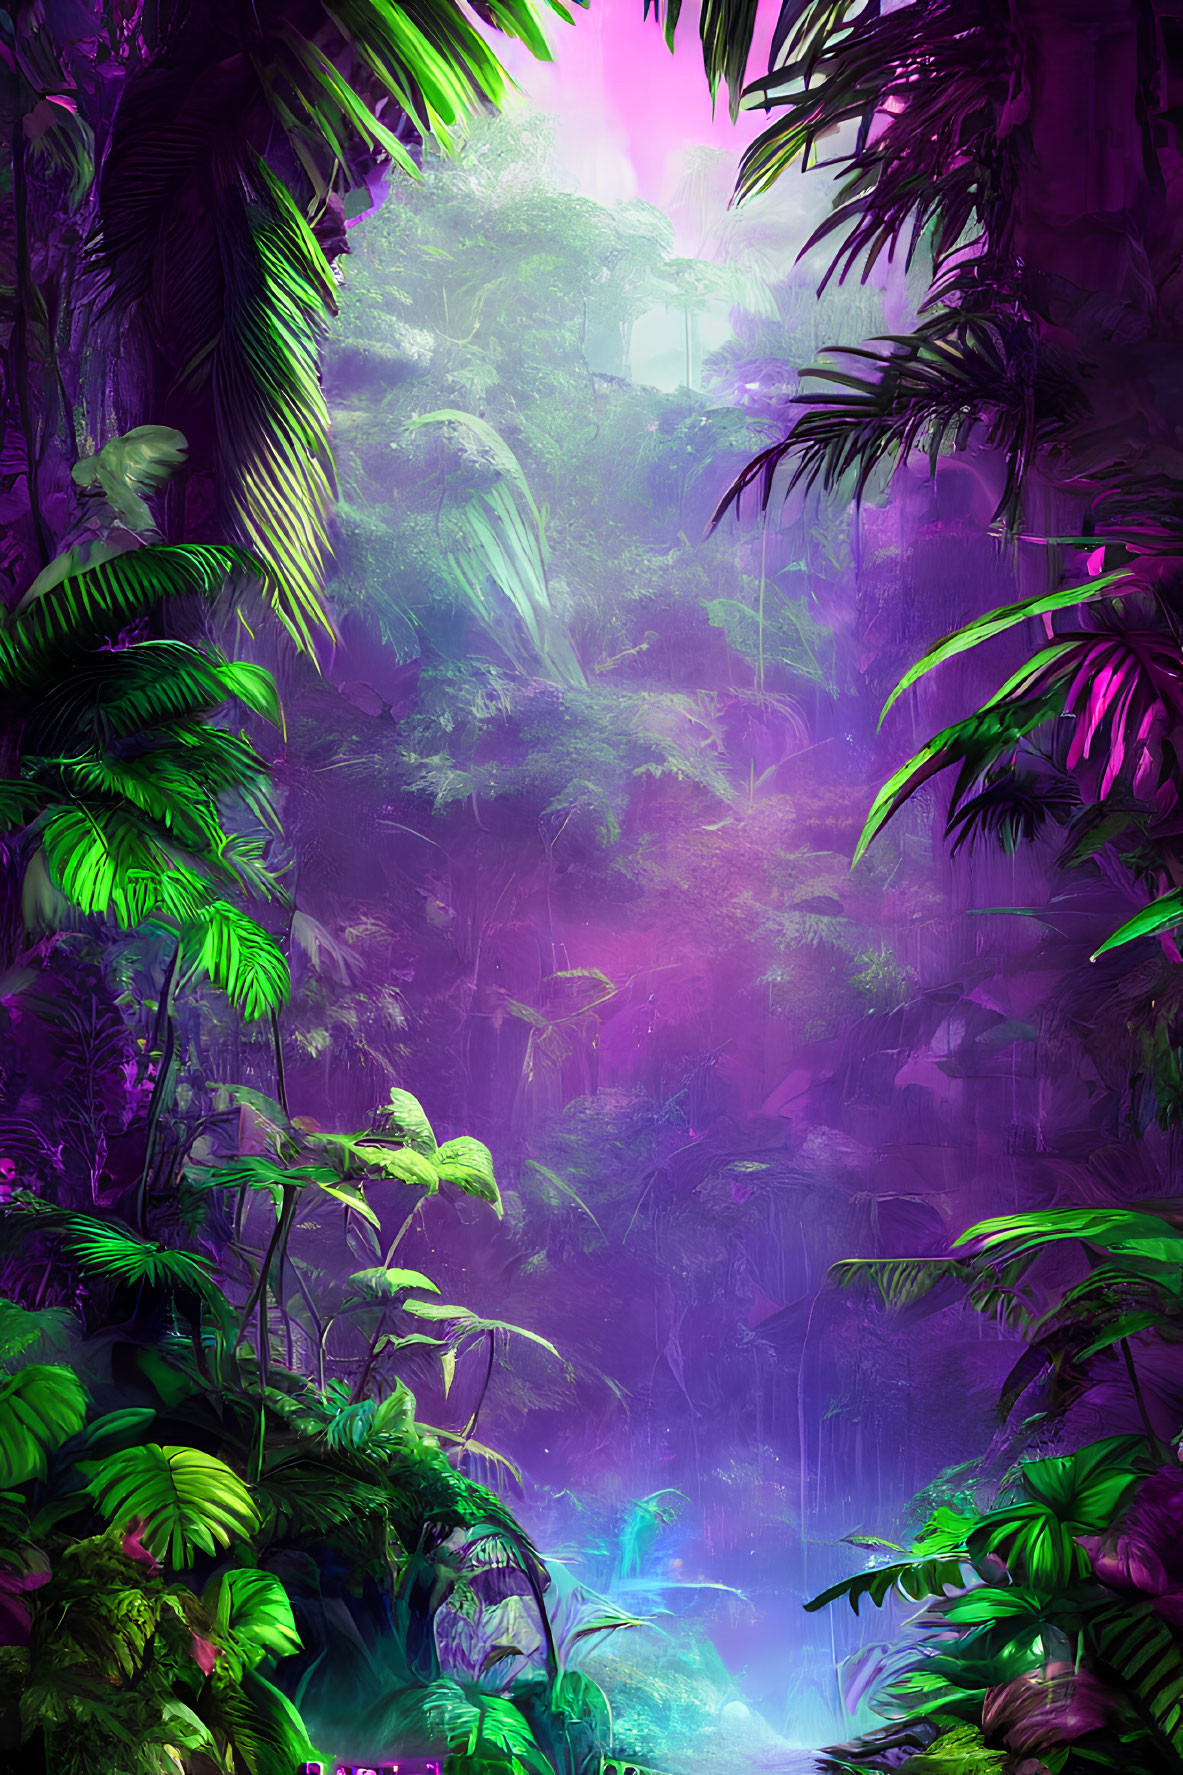 Colorful digital artwork of mystical jungle with neon hues and ethereal lighting